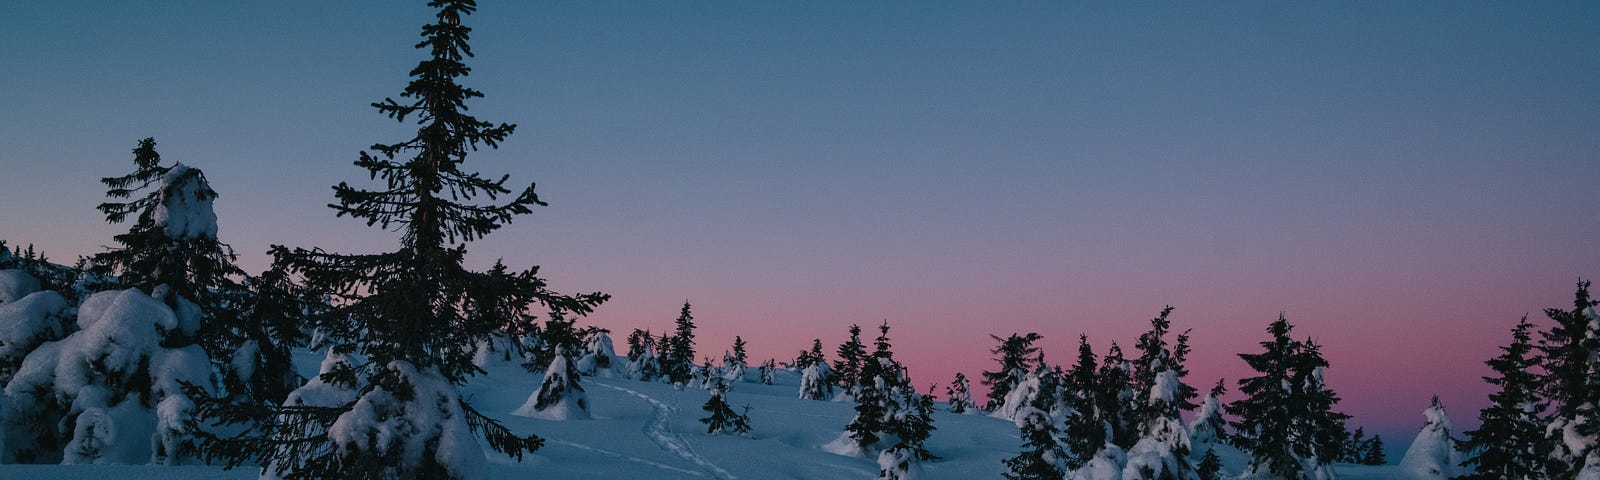 A snowy hillside with pinetrees at sunrise or sunset.